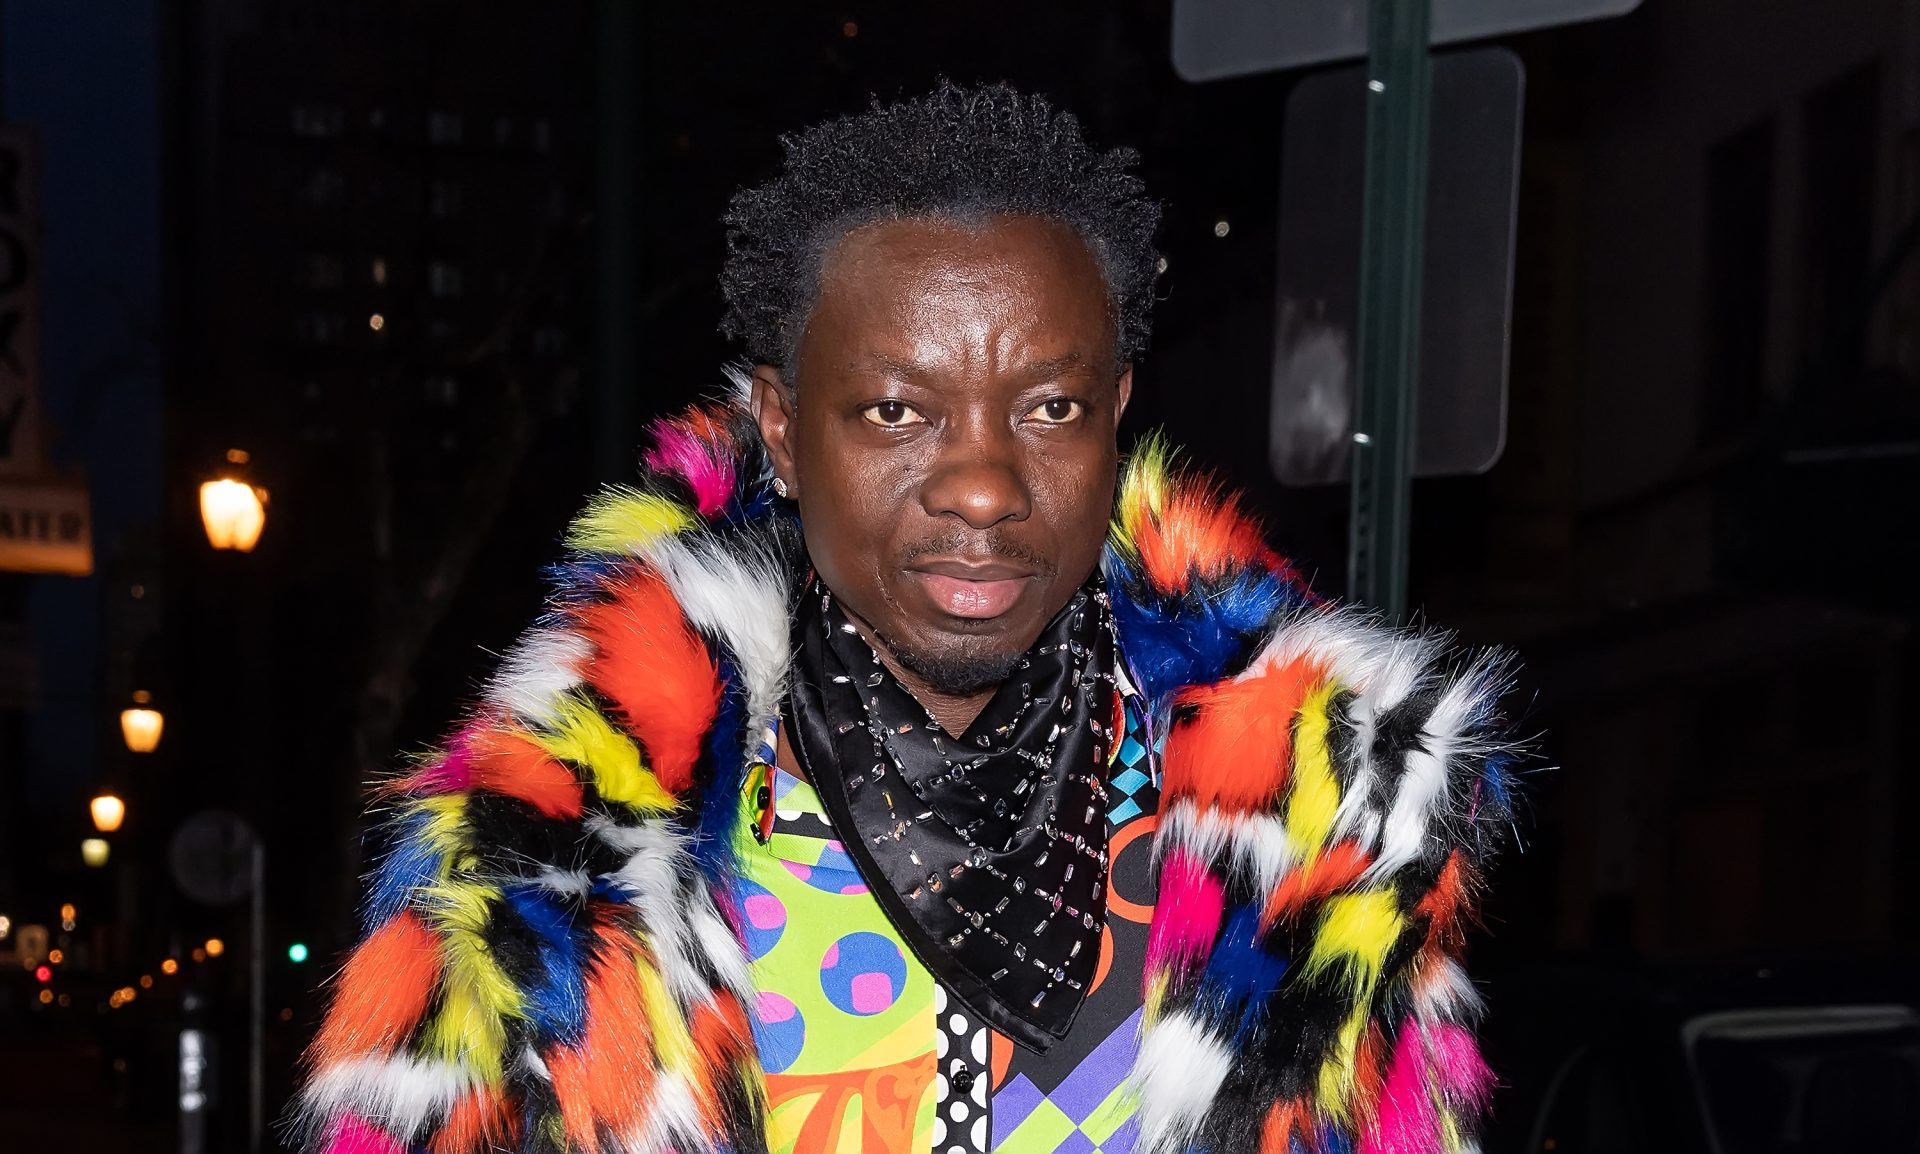 Michael Blackson Doesn’t Want Fiancée Rada Enjoying A Male Sidepiece, A Side Woman Is “Okay” Though (Exclusive)